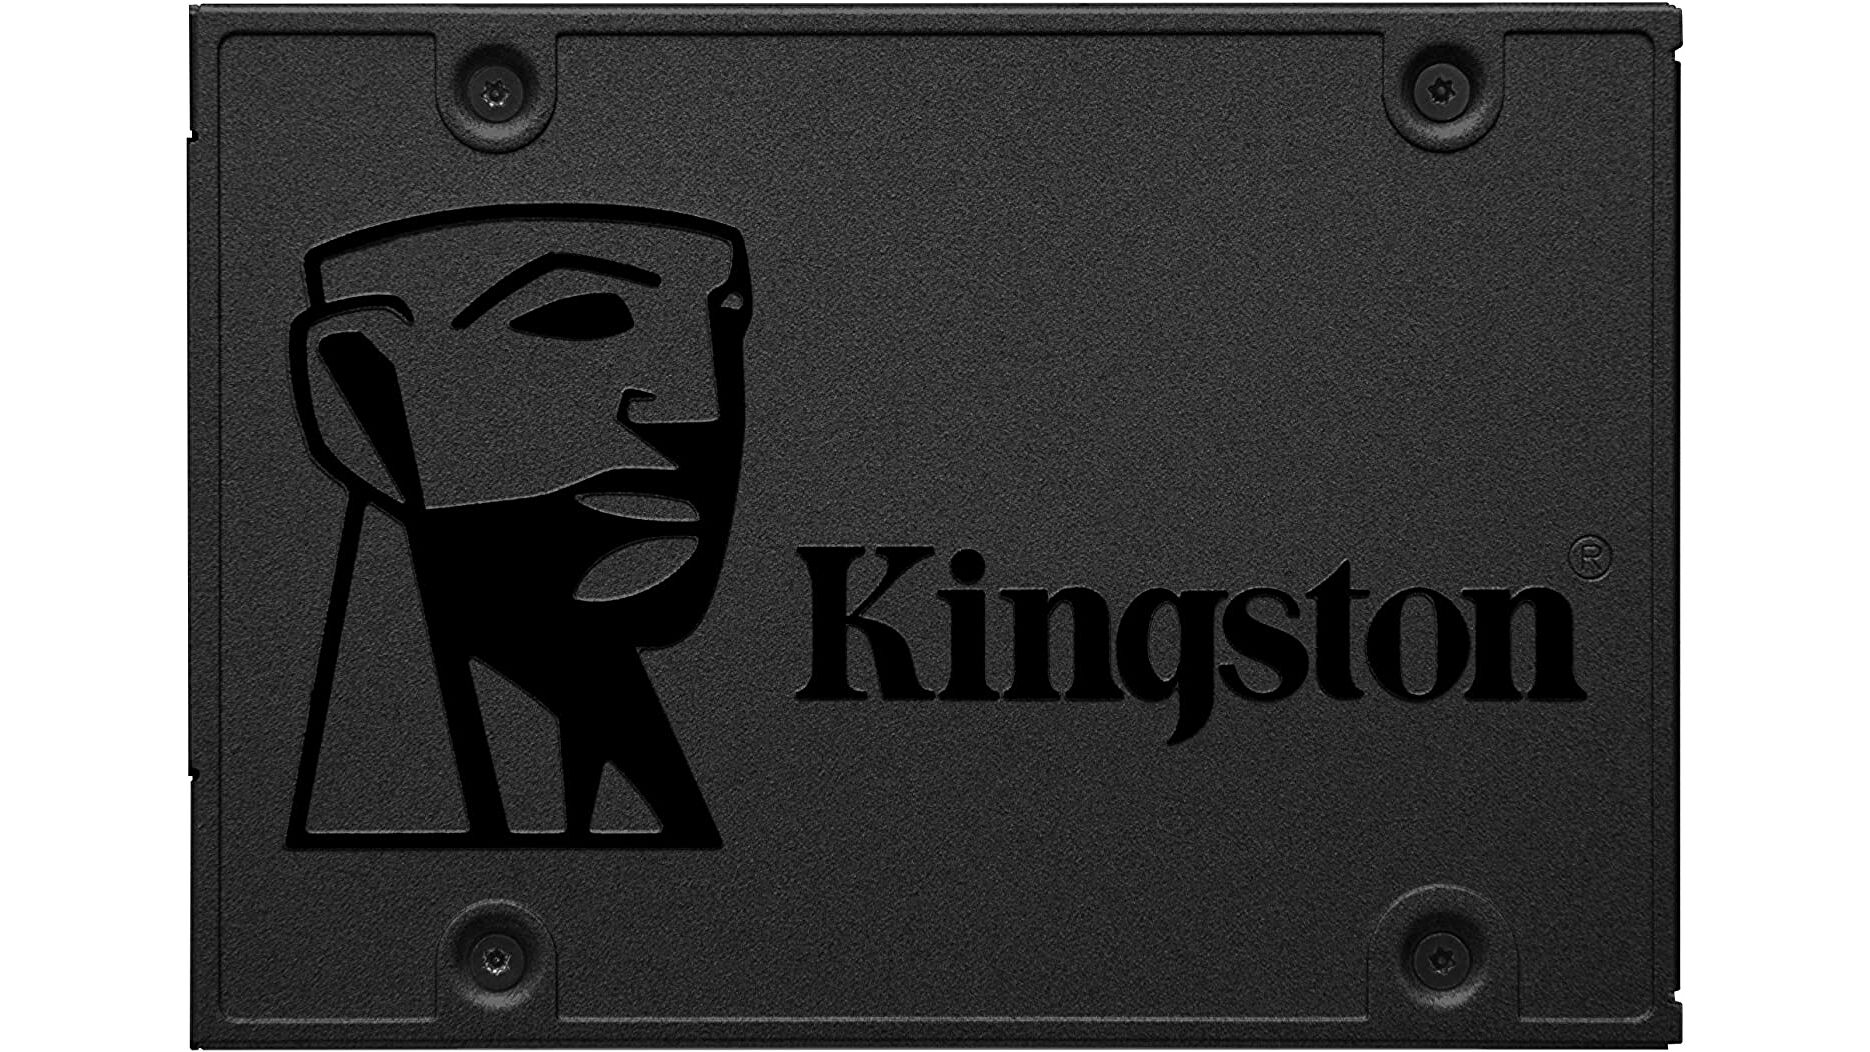 Grab a 480GB Kingston SSD for £25, upgrade an old laptop or something